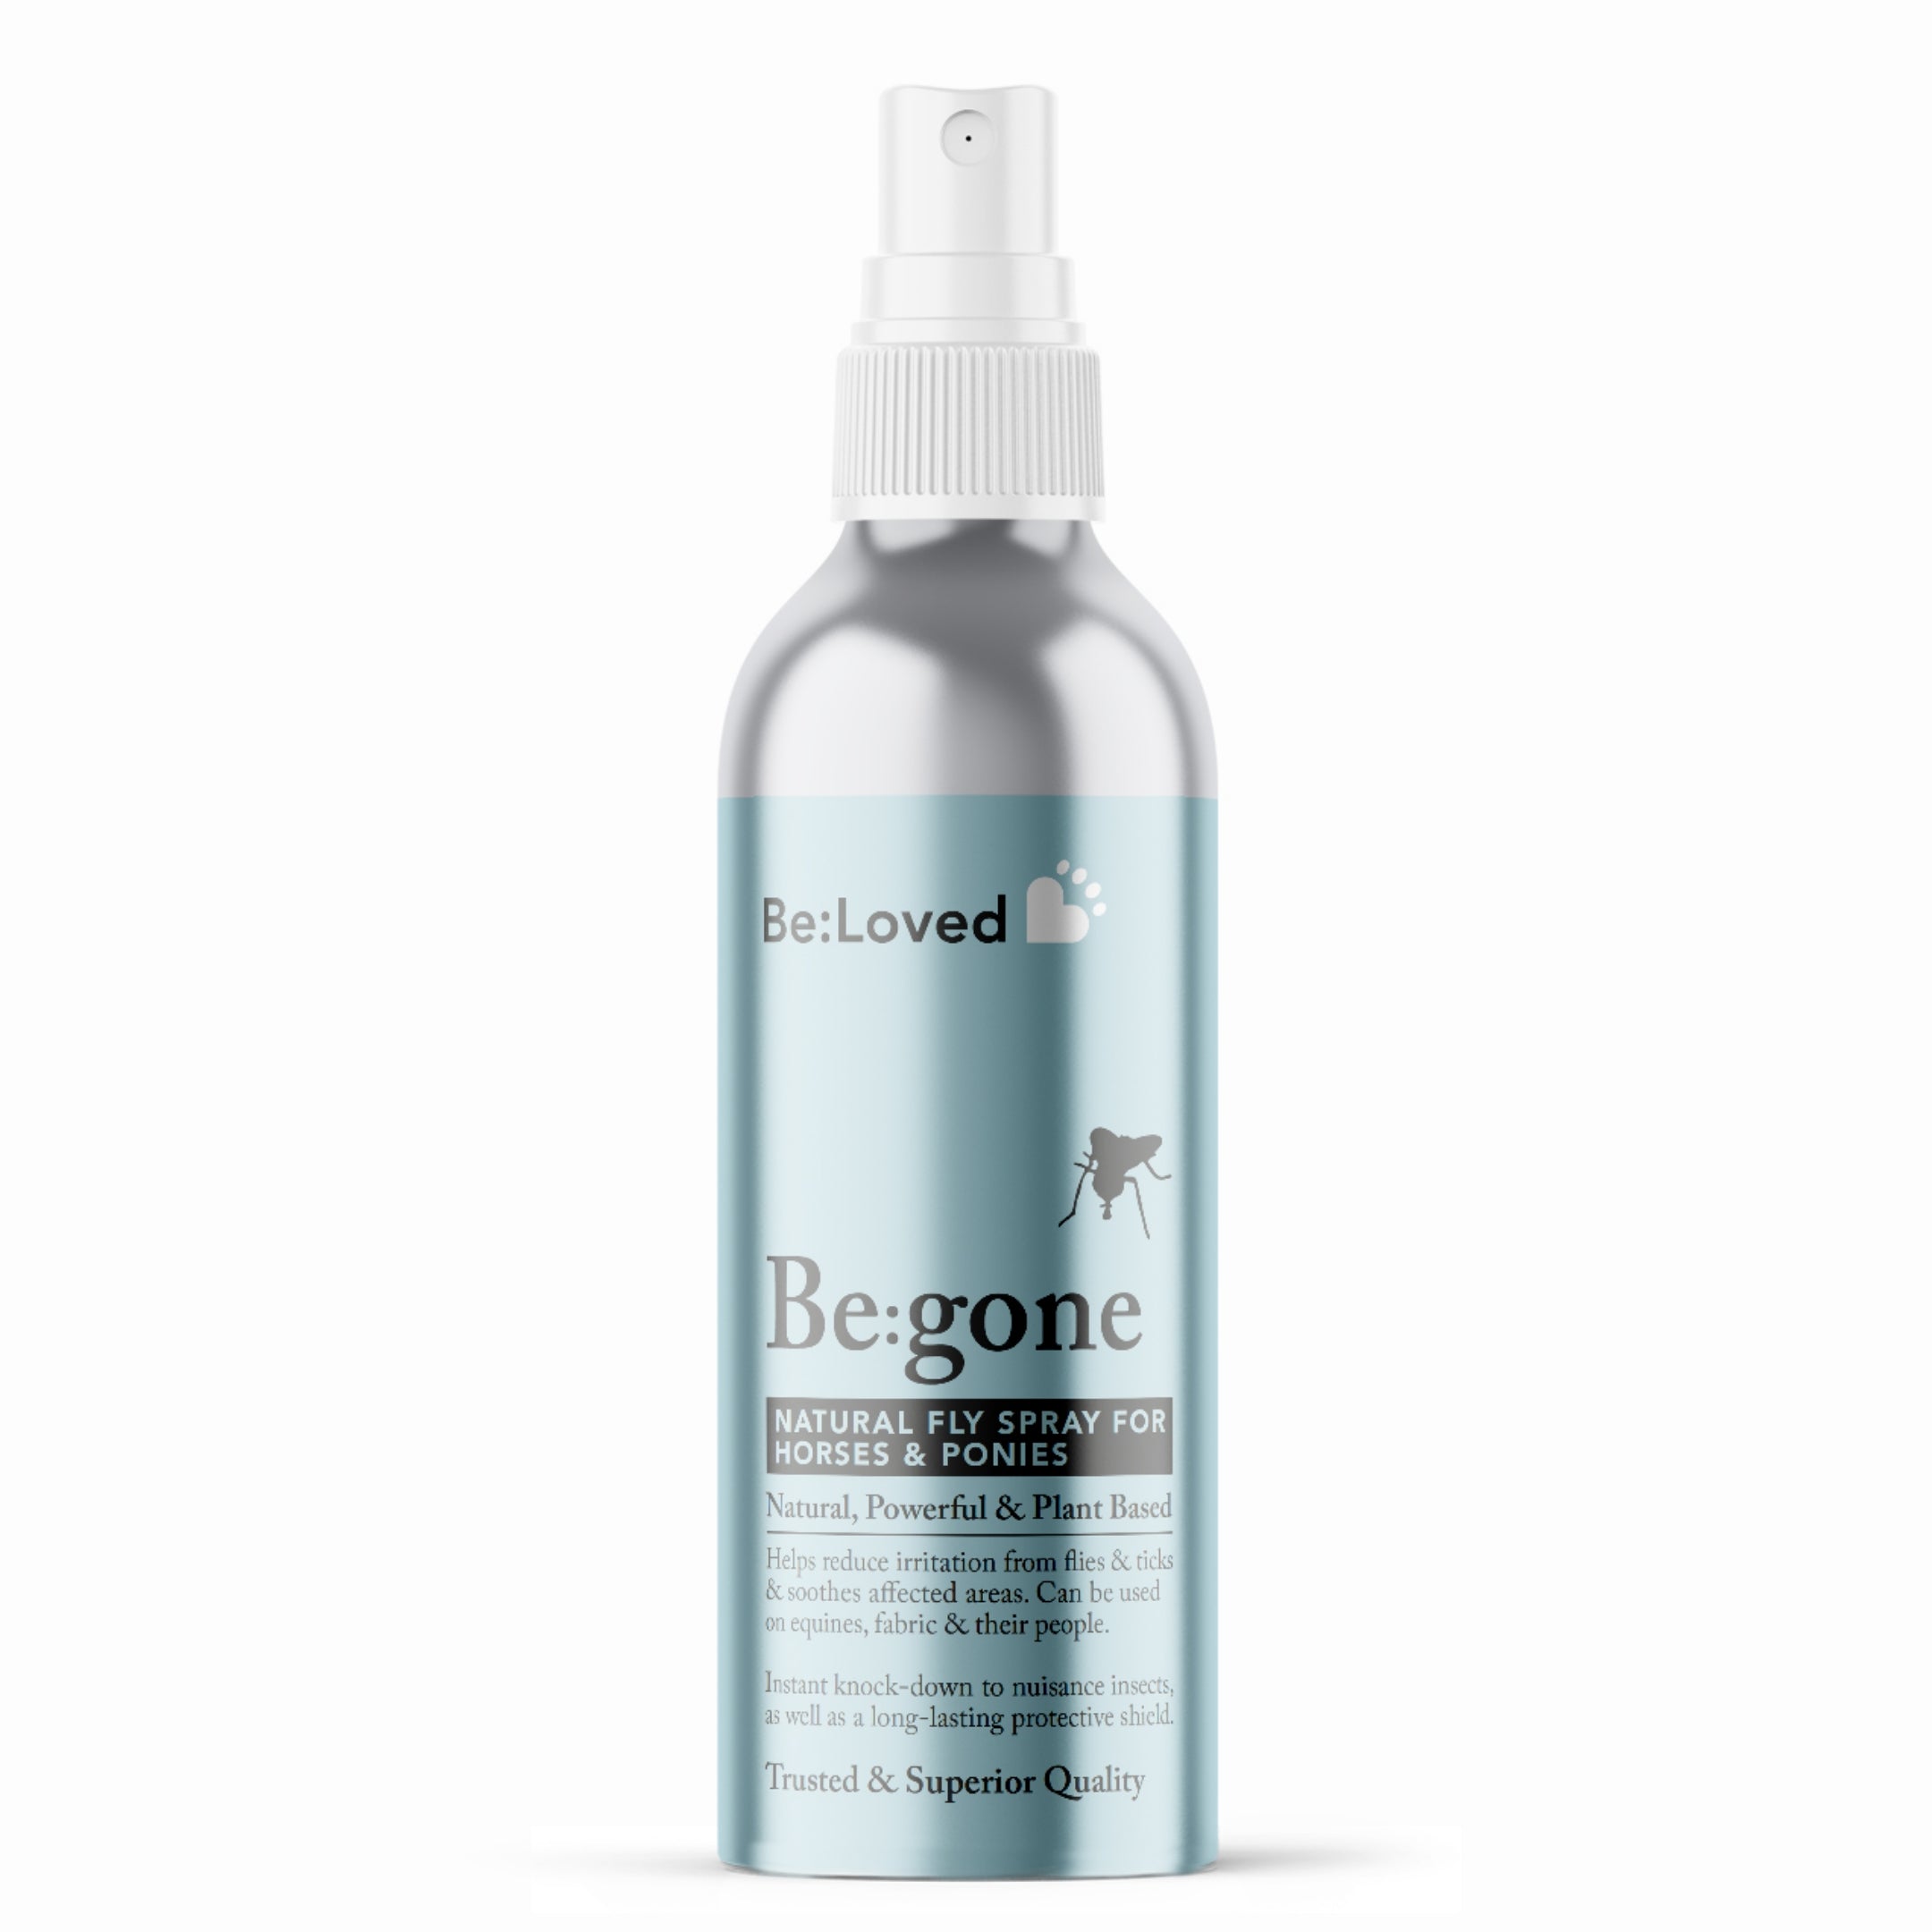 Be:Gone - Natural DEET-Free Equine Fly Spray